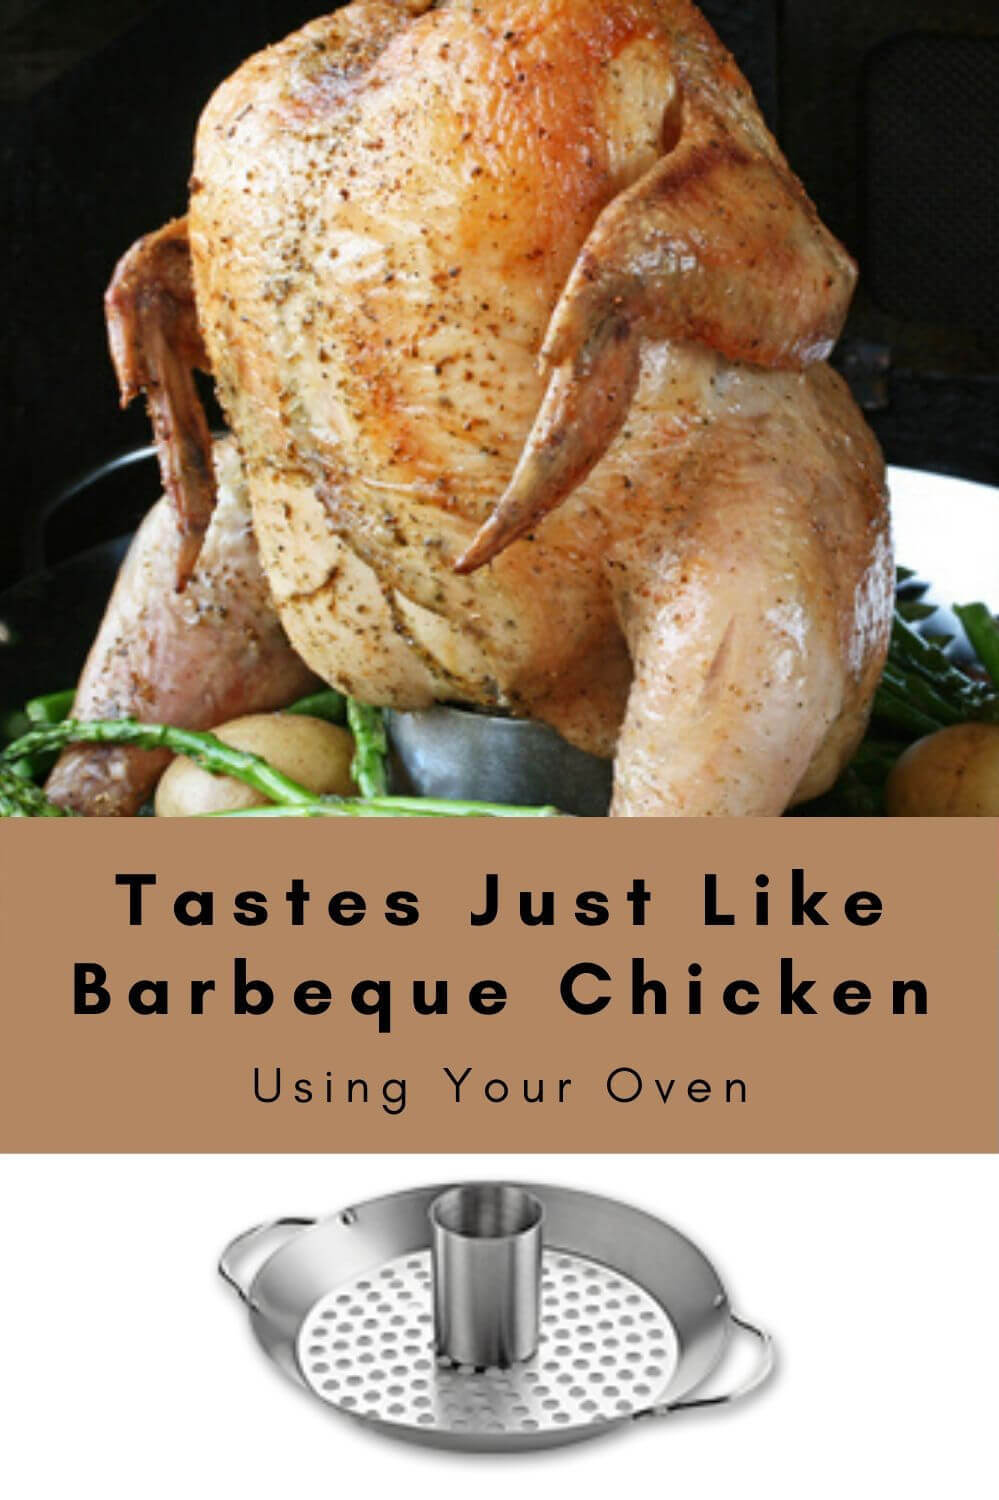 Tastes Just Like Barbeque Chicken - using your oven